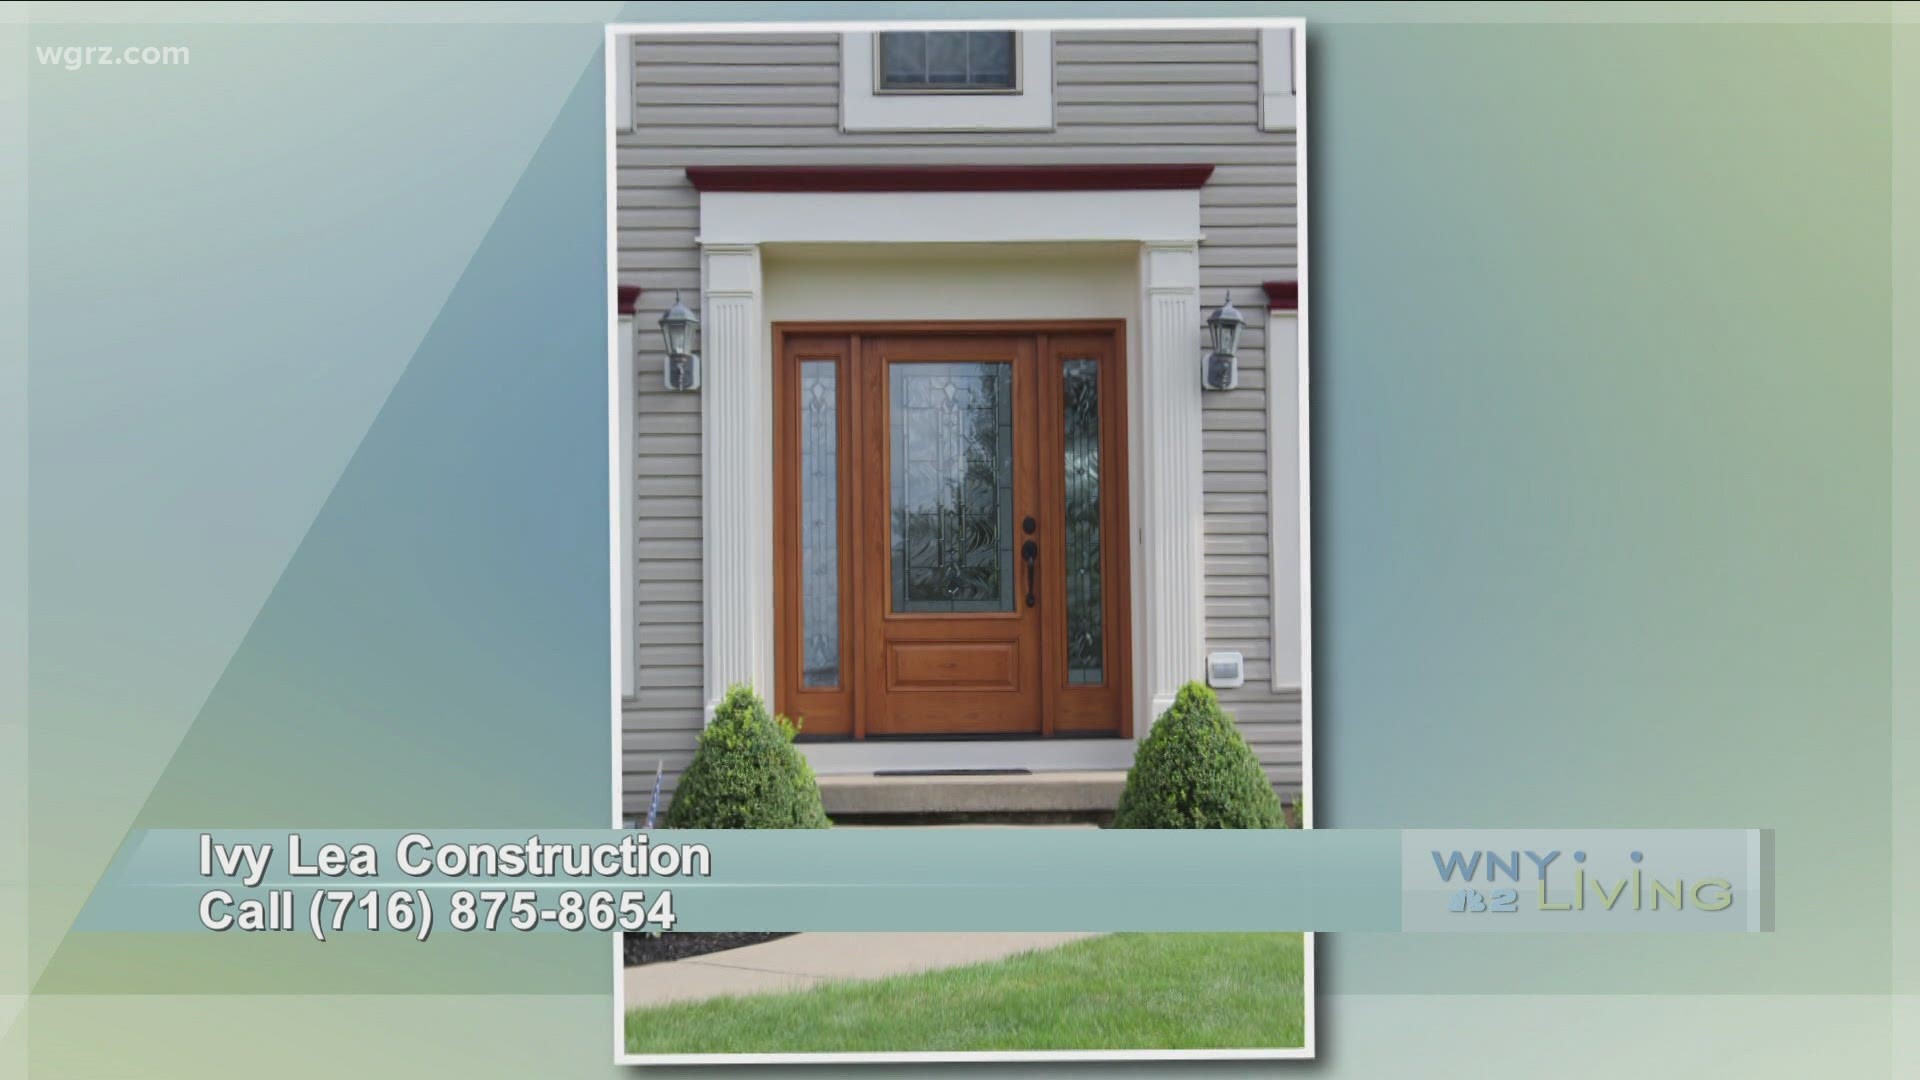 WNY Living - June 26 - Ivy Lea Construction (THIS VIDEO IS SPONSORED BY IVY LEA CONSTRUCTION)